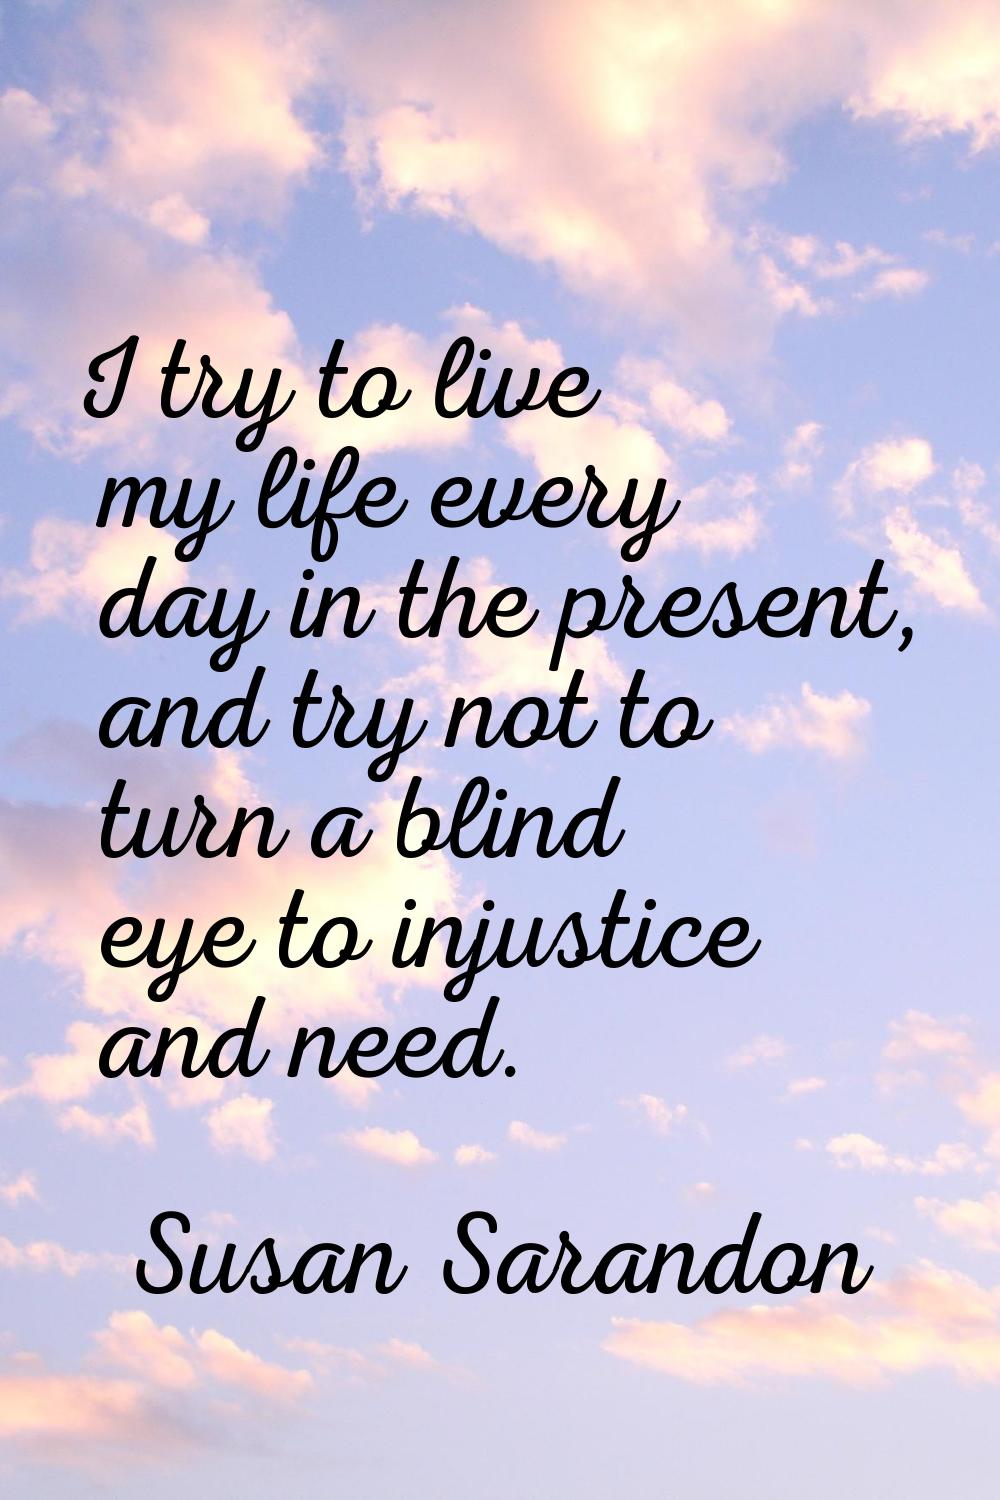 I try to live my life every day in the present, and try not to turn a blind eye to injustice and ne